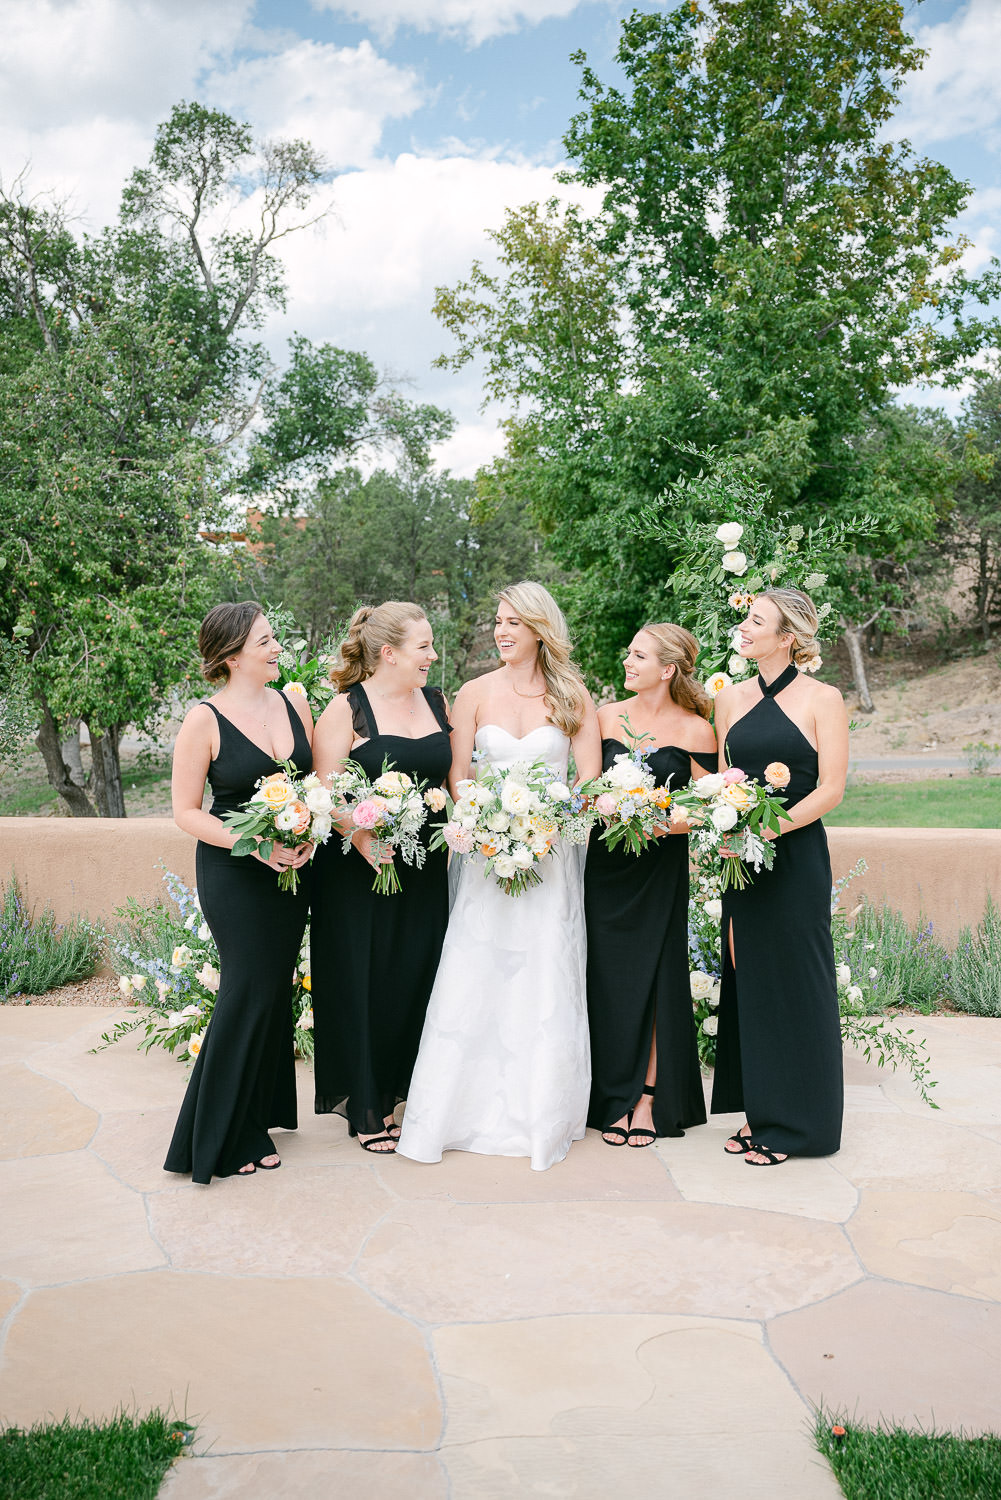 Bride and Bridesmaids in front of a floral wedding arch.